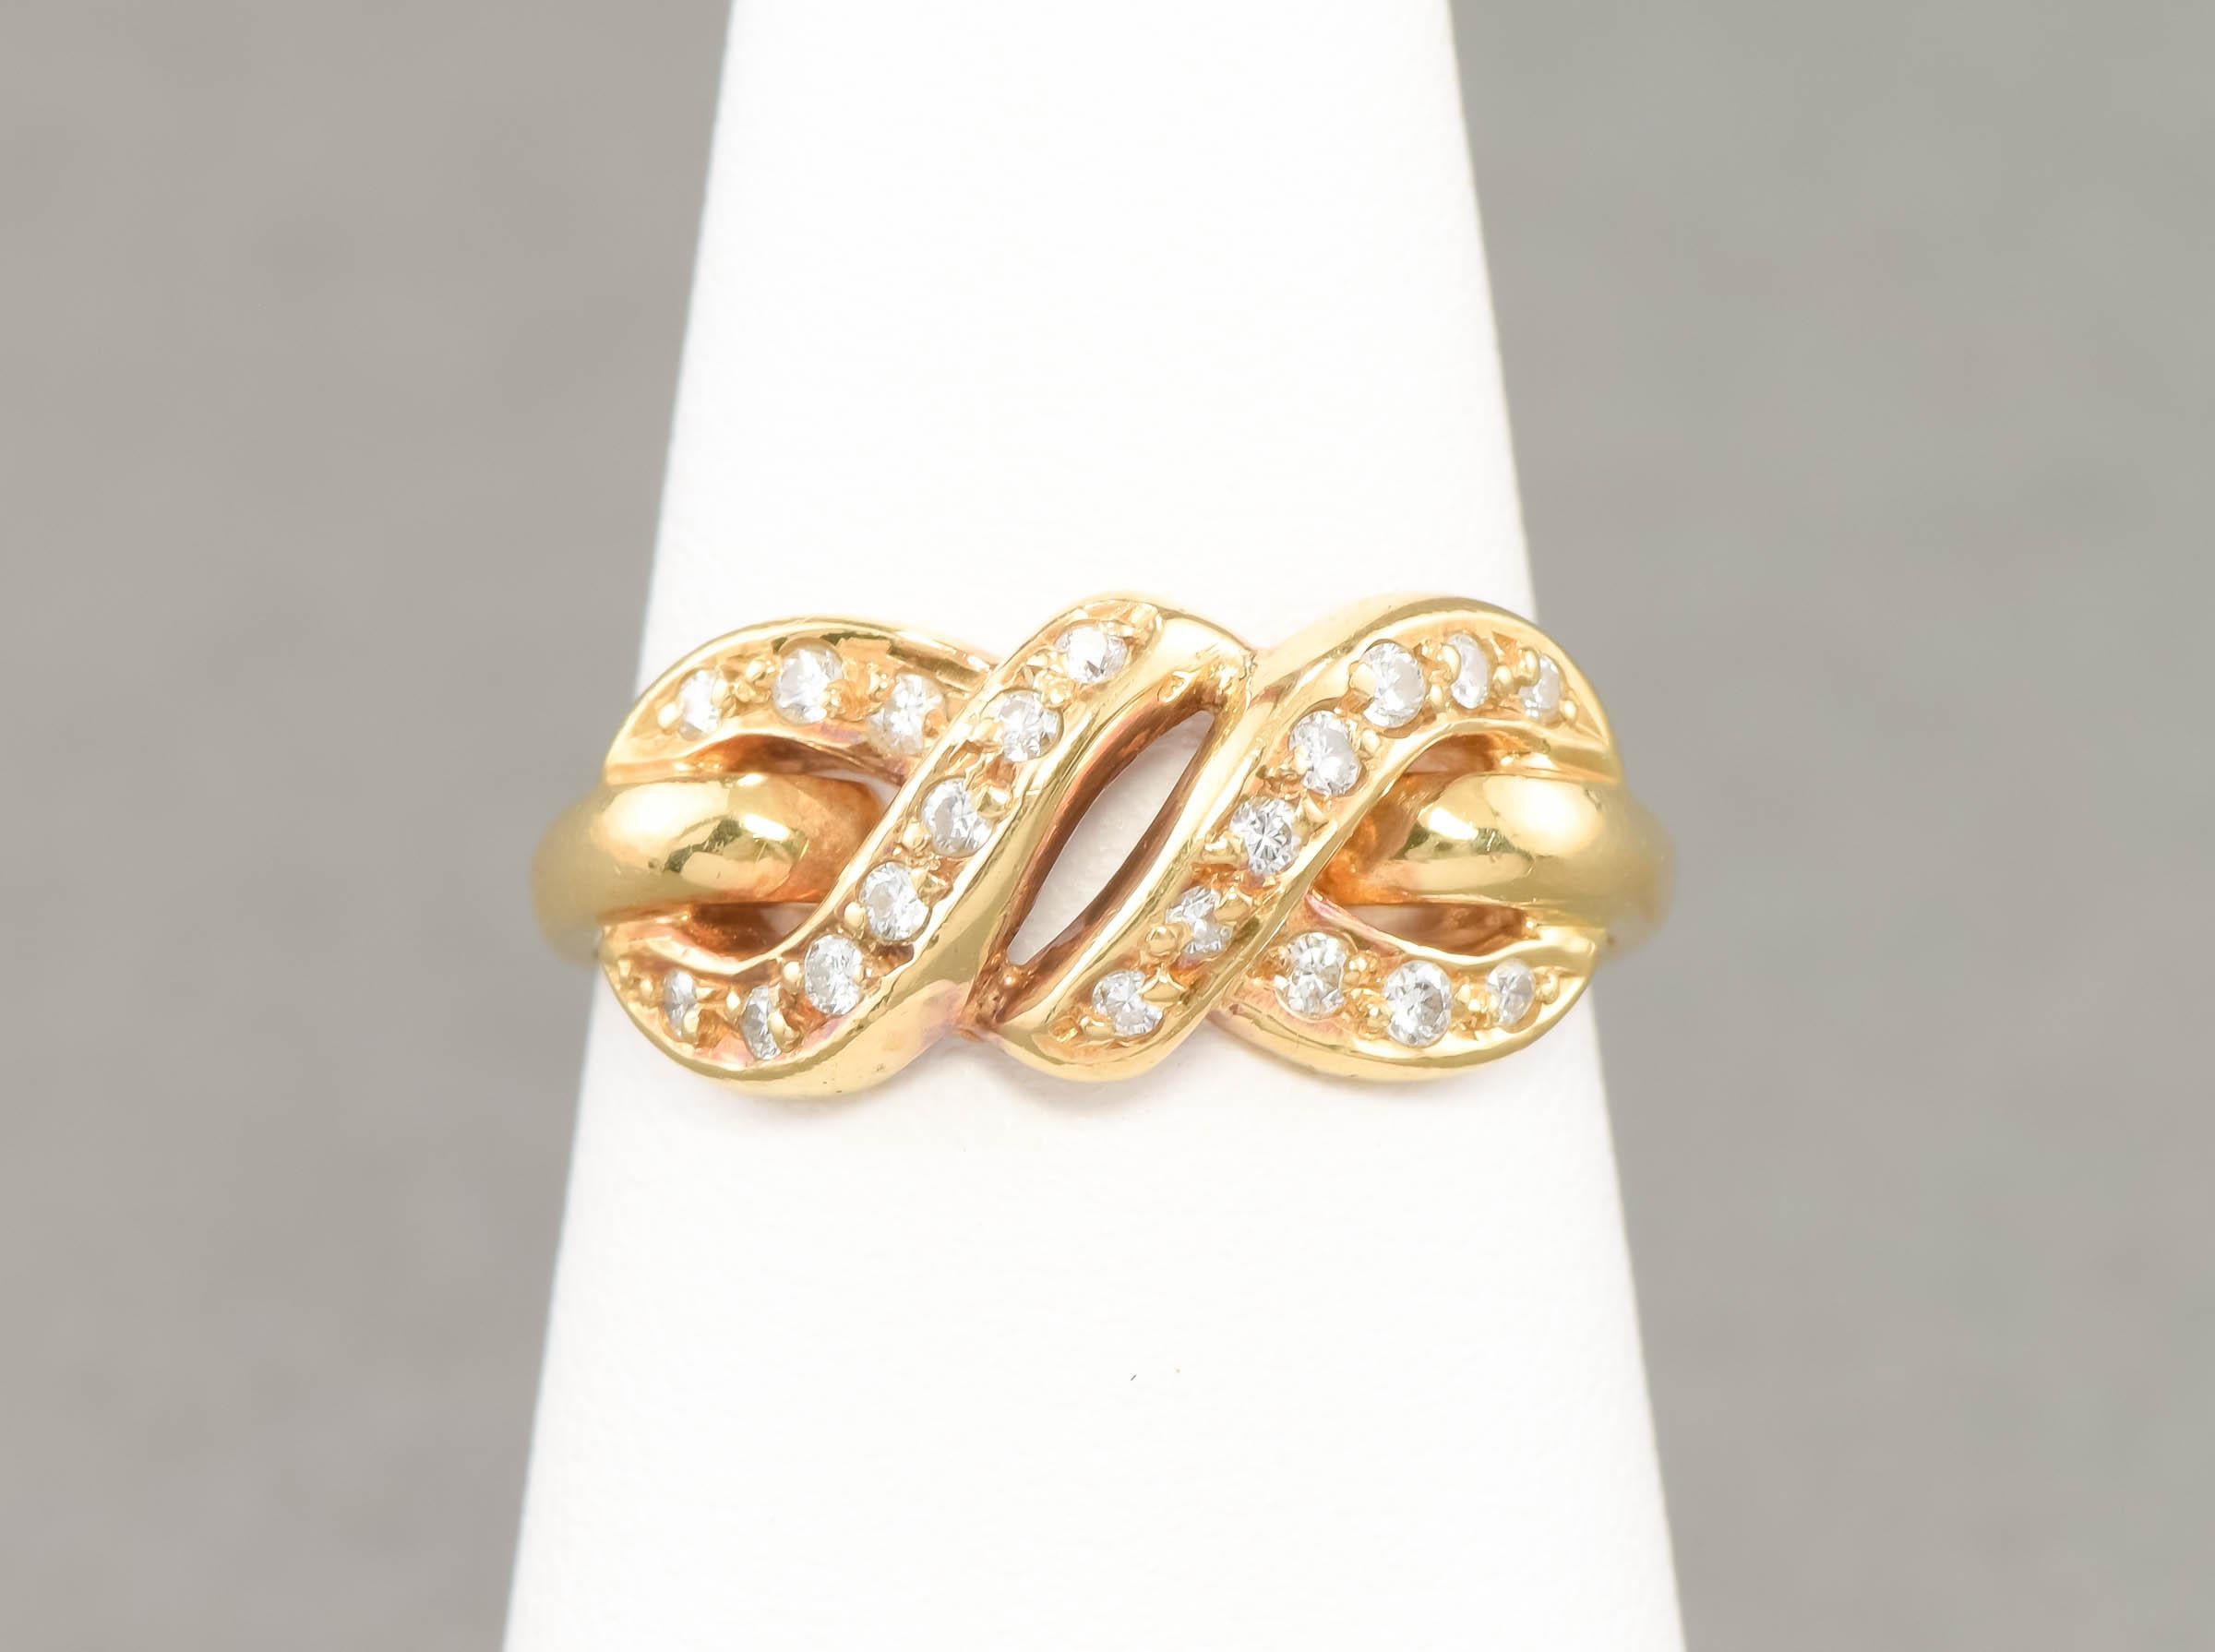 Vintage 18K Gold Diamond Infinity Love Knot Ring, Hallmarked 1985 For Sale 6